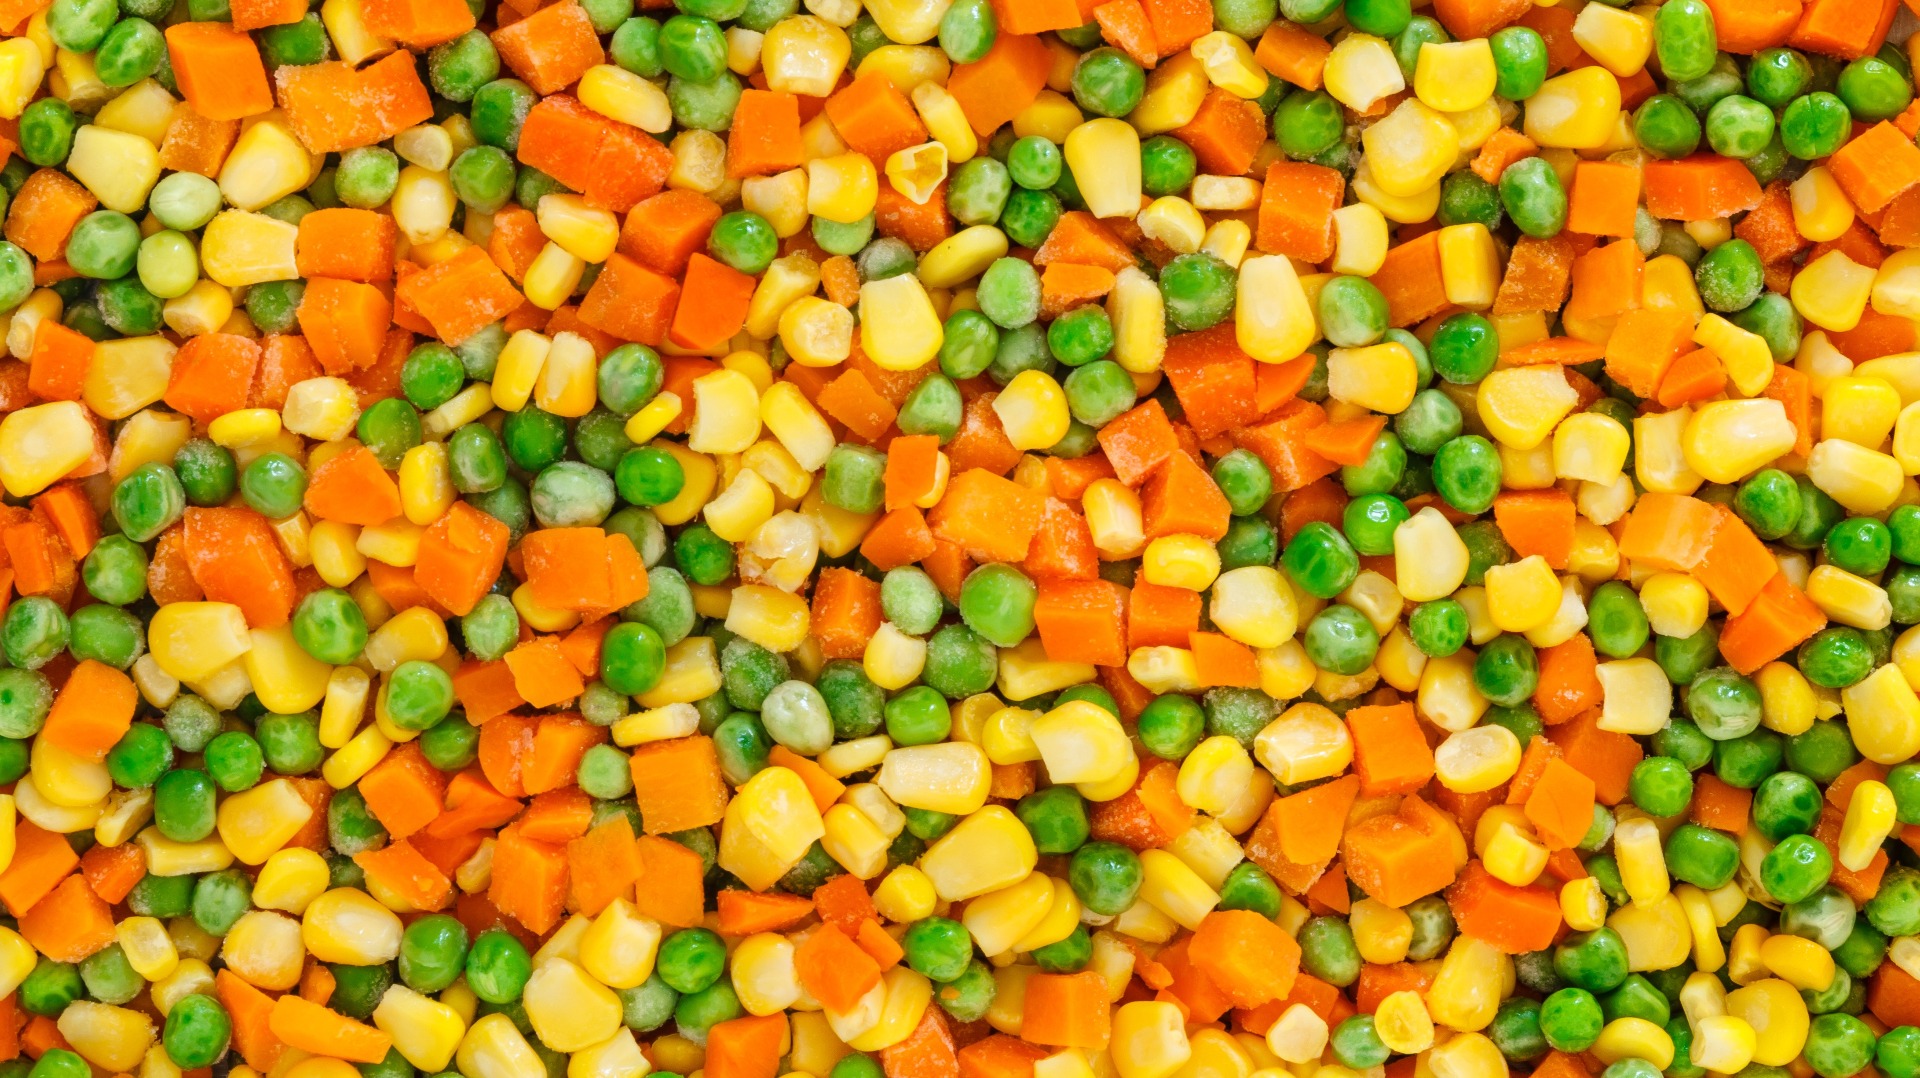 Frozen Vegetables Wallpapers High Quality Download Free